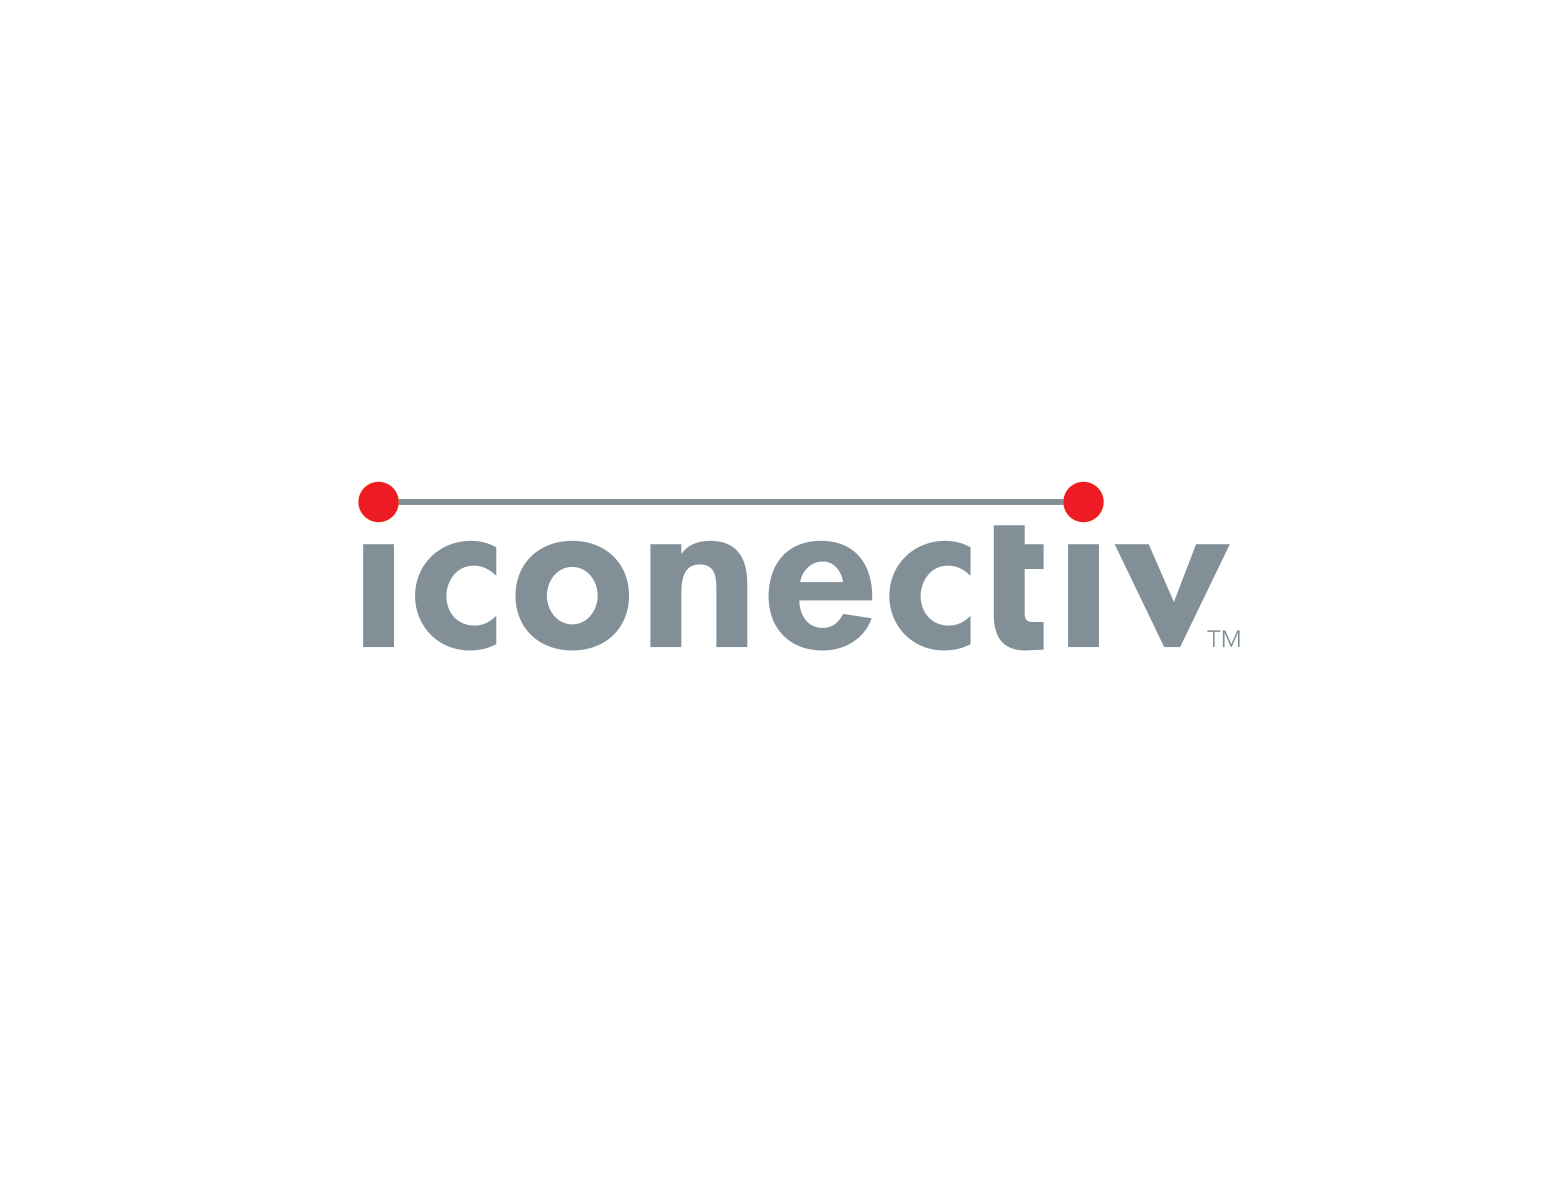 Project Image for Identity, Iconectiv